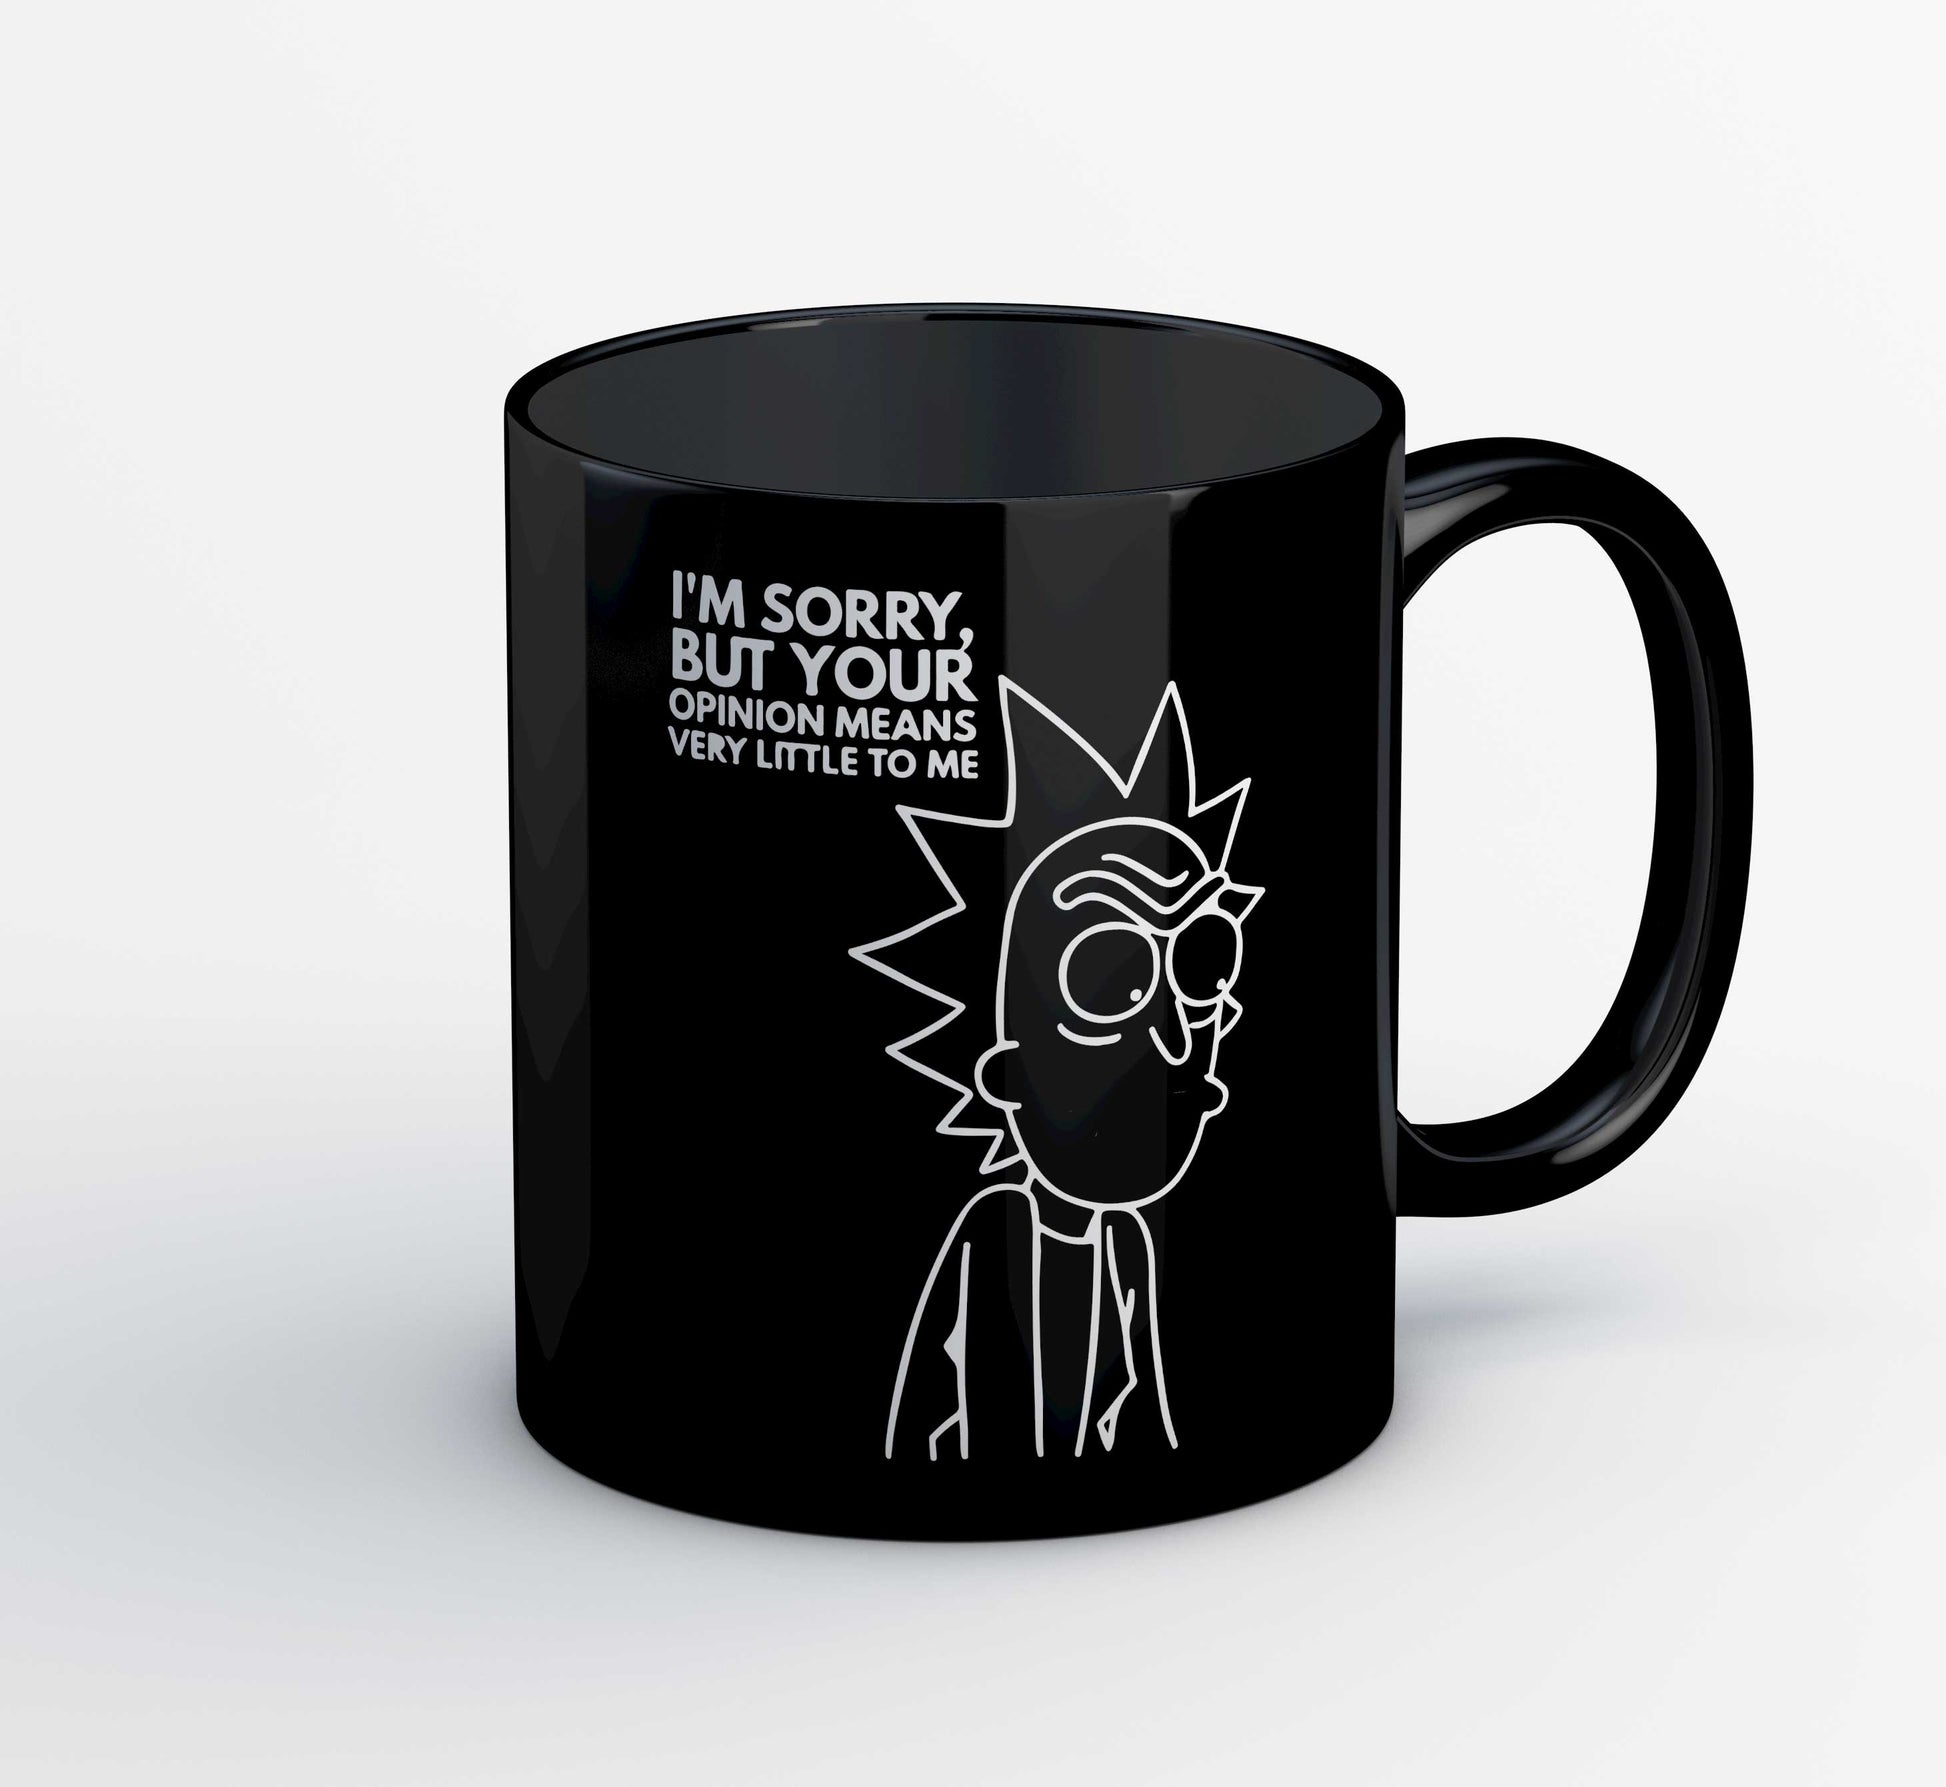 rick and morty opinion mug coffee ceramic buy online india the banyan tee tbt men women girls boys unisex  rick and morty online summer beth mr meeseeks jerry quote vector art clothing accessories merchandise